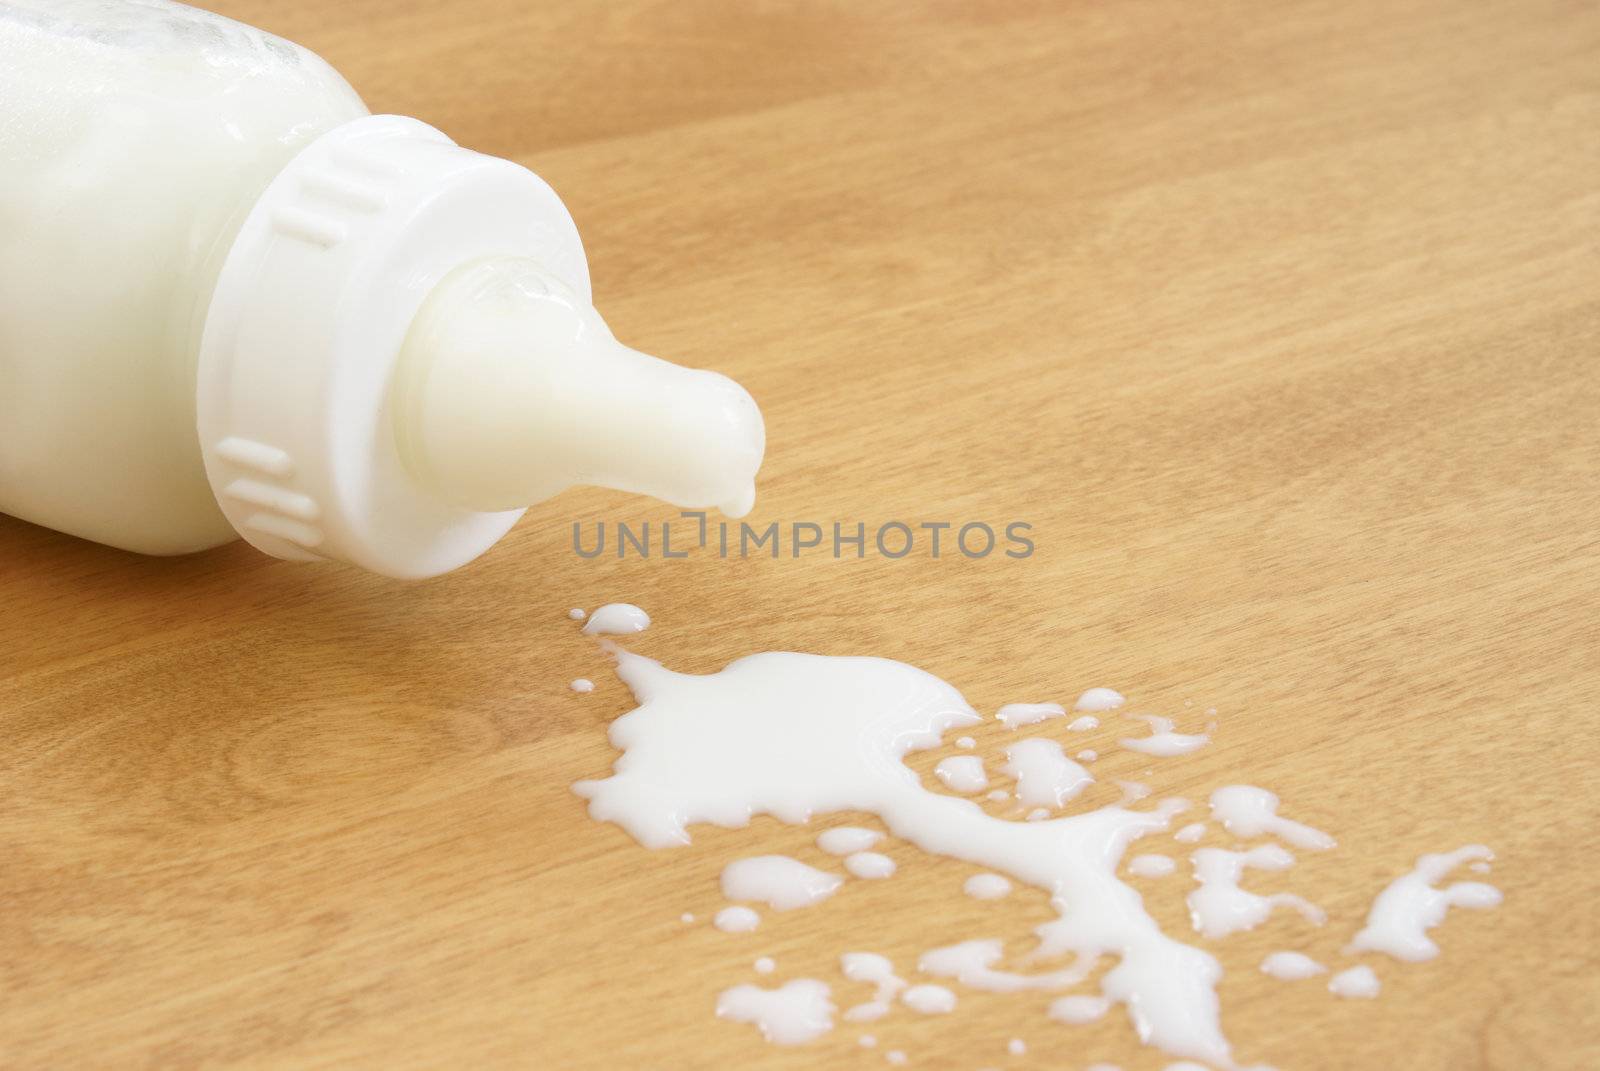 A baby bottle has tipped over and milk has been spilled.